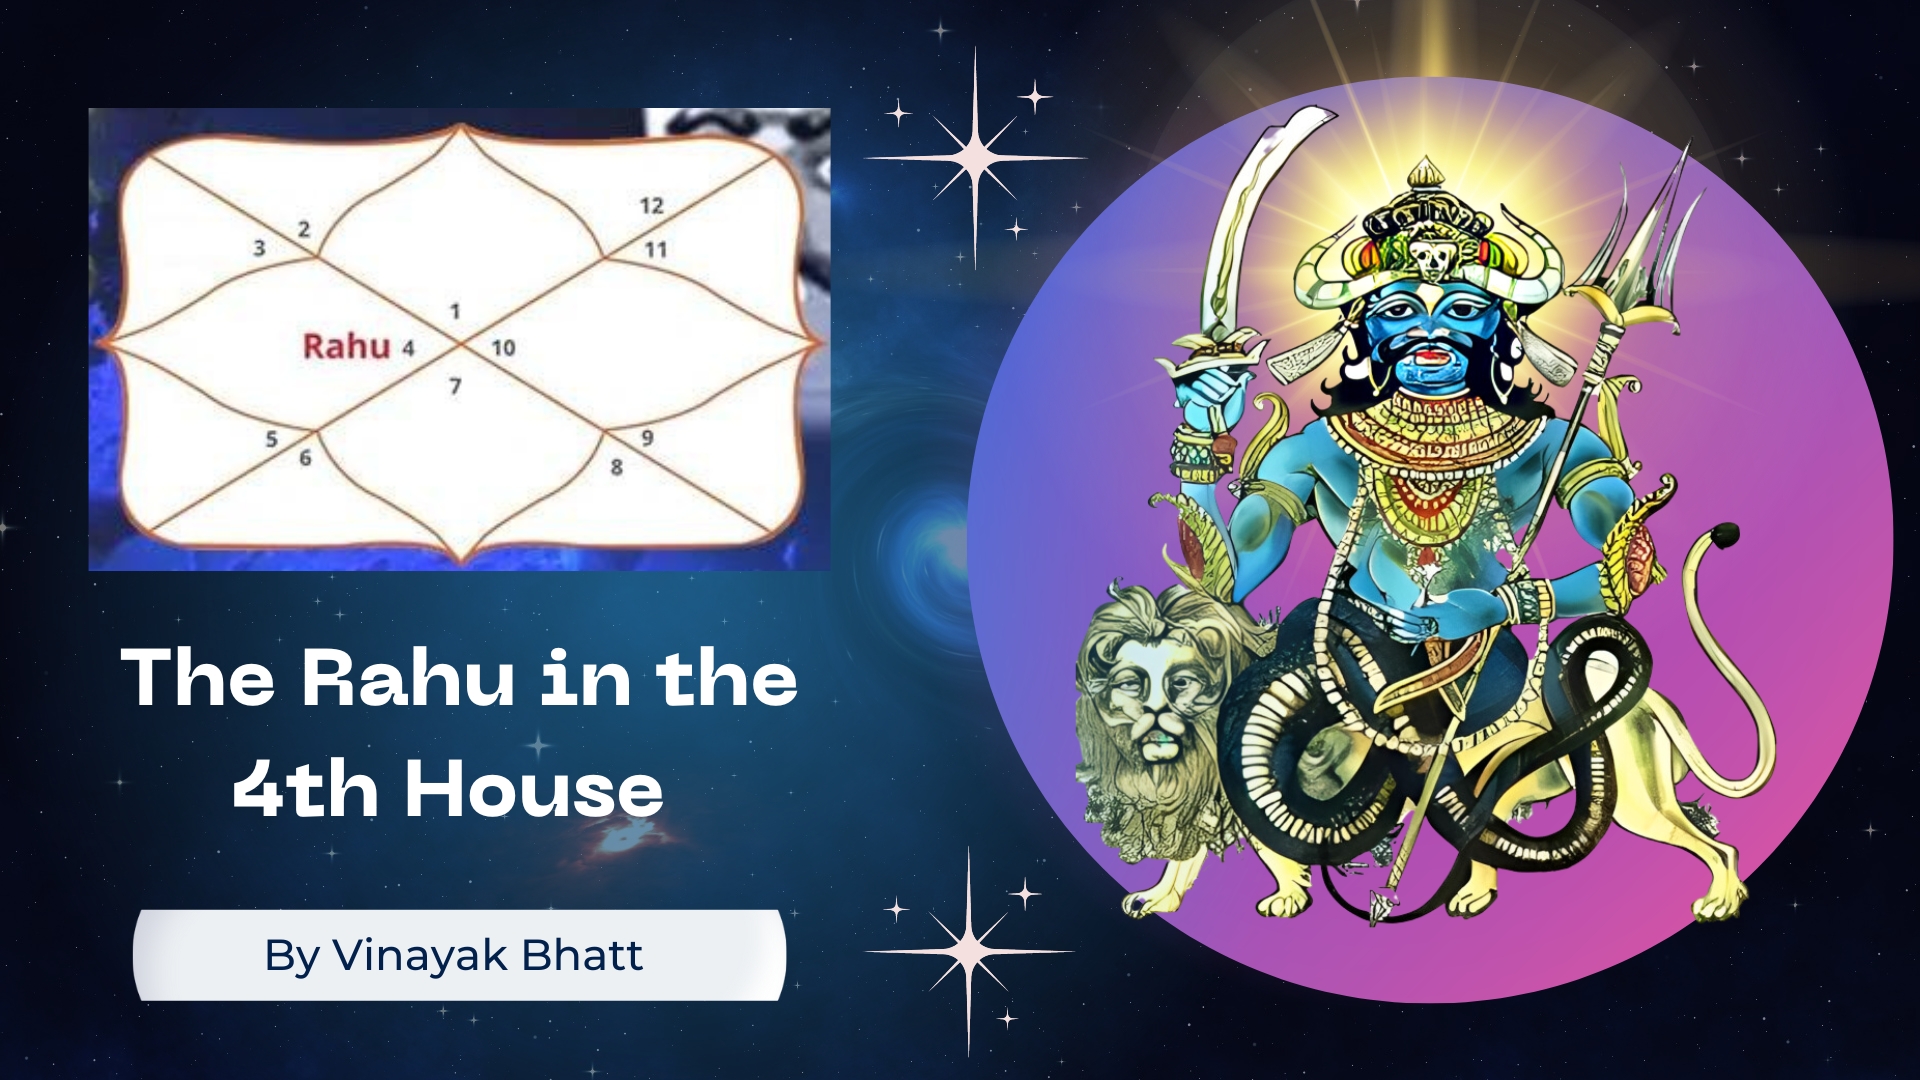 The Rahu in the 4th House